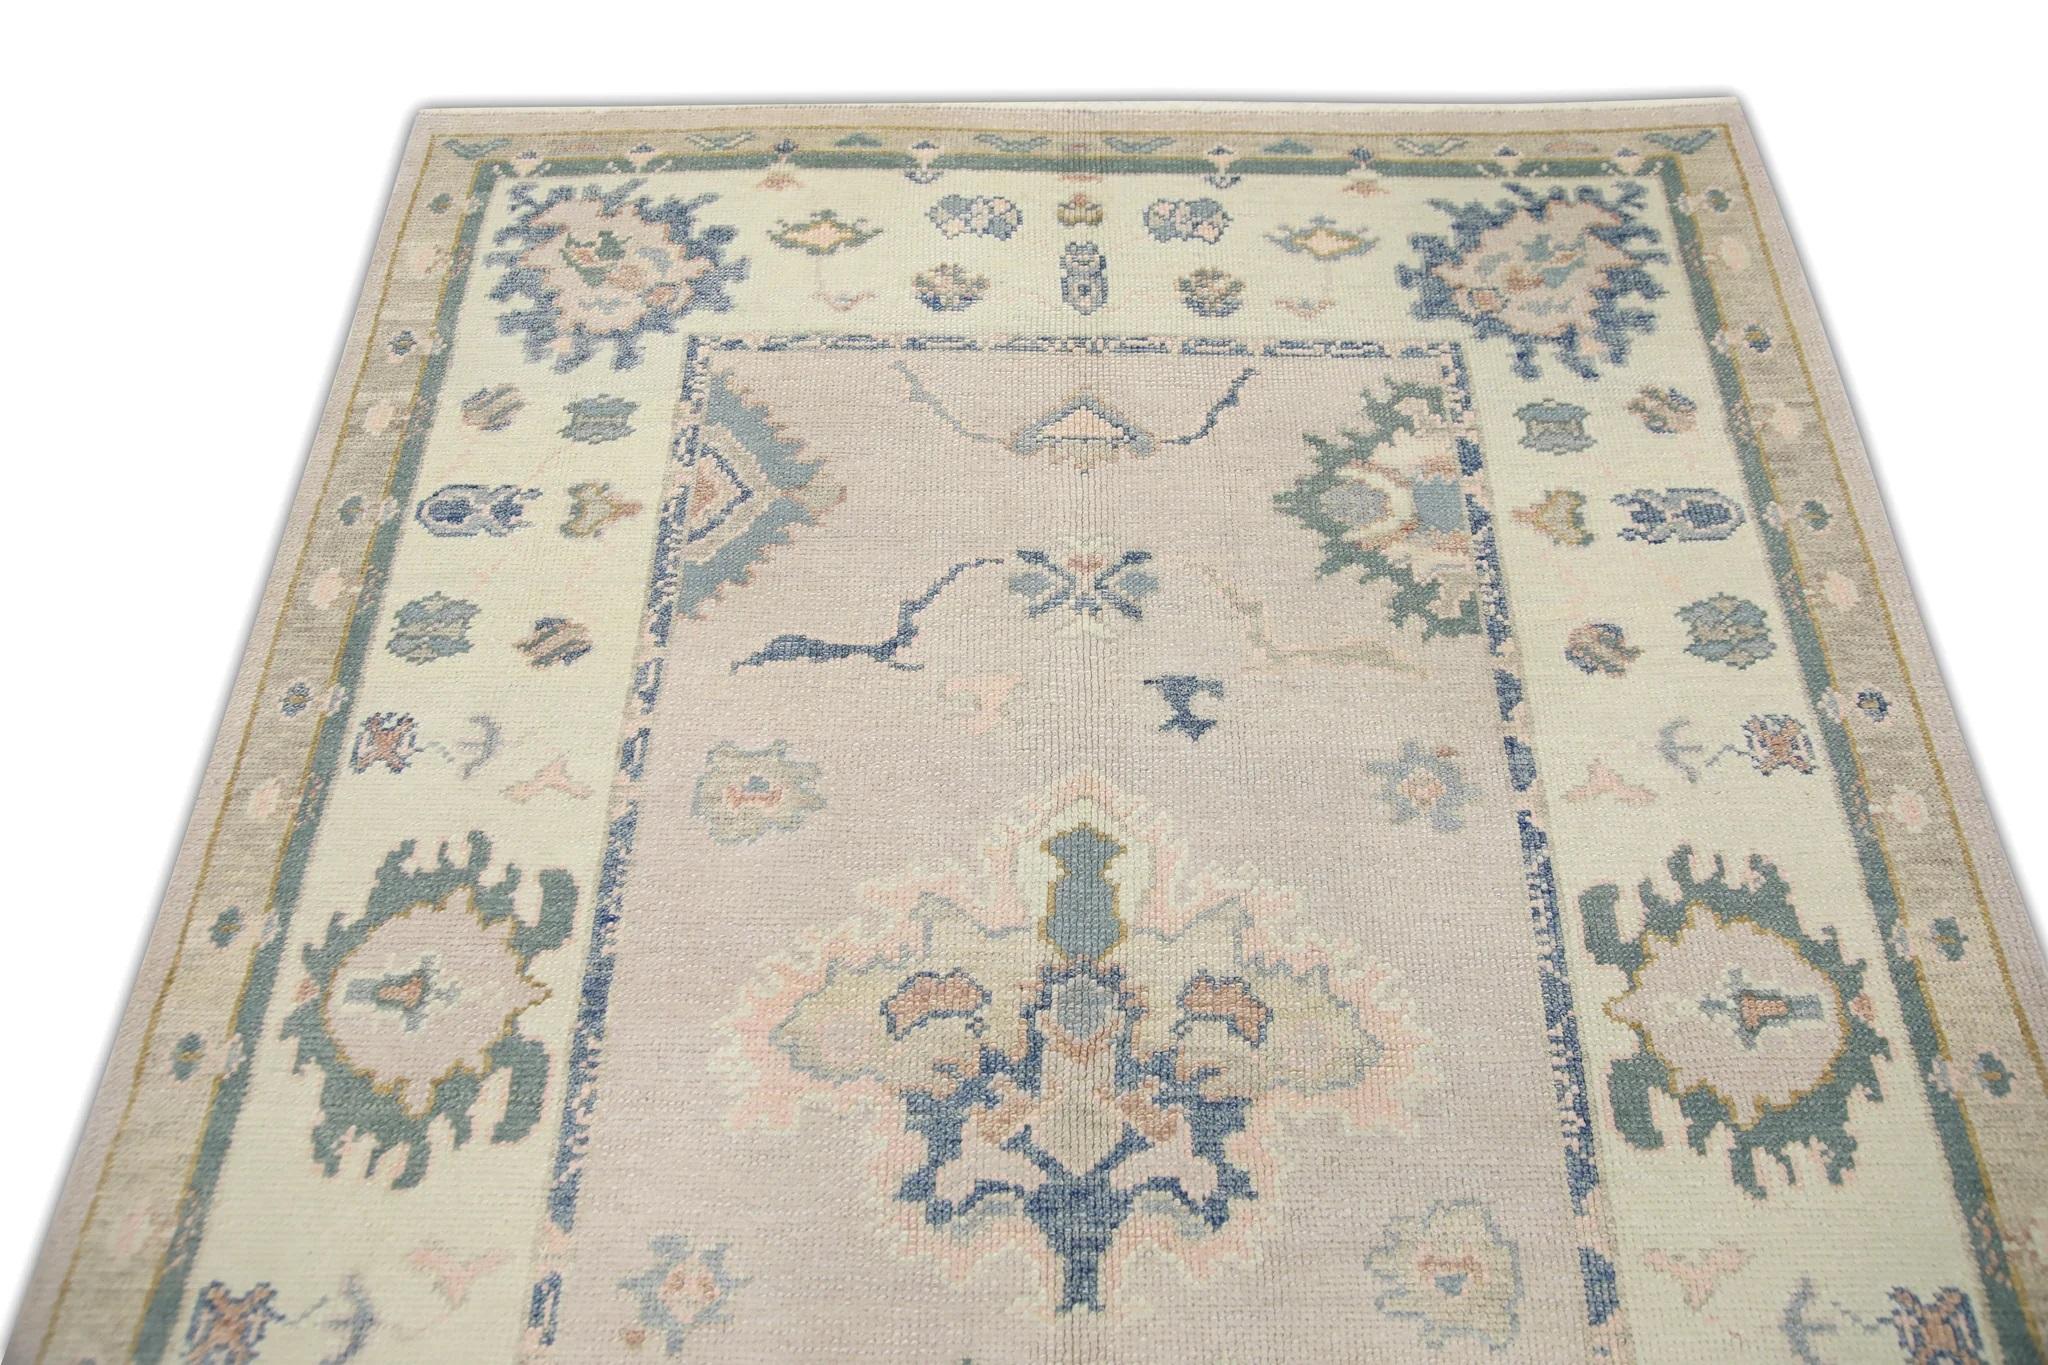 Contemporary Soft Pink Handwoven Wool Turkish Oushak Rug in Blue Floral Pattern 4'11